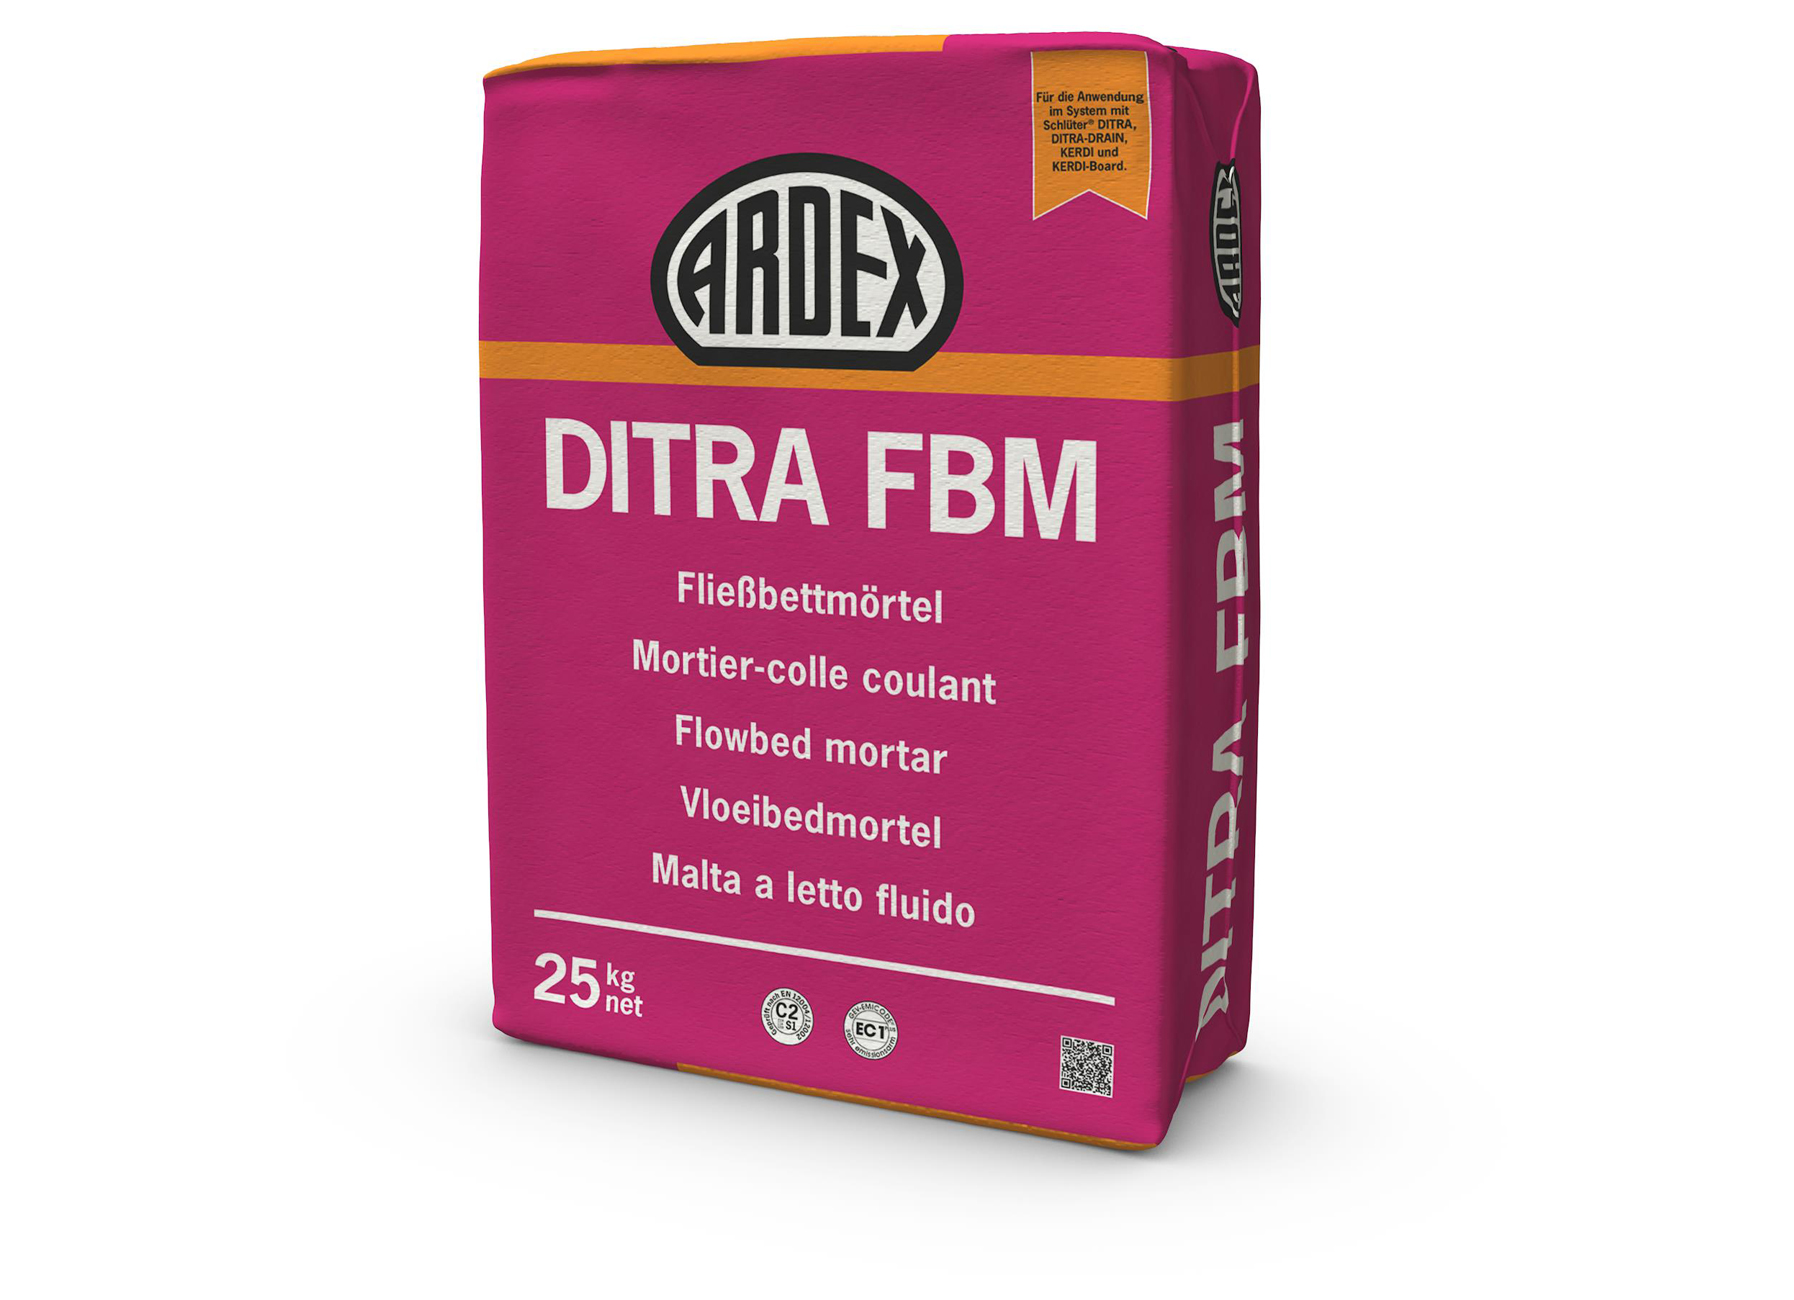 ARDEX DITRA FBM MORTIER COLLE COULANT 25KG